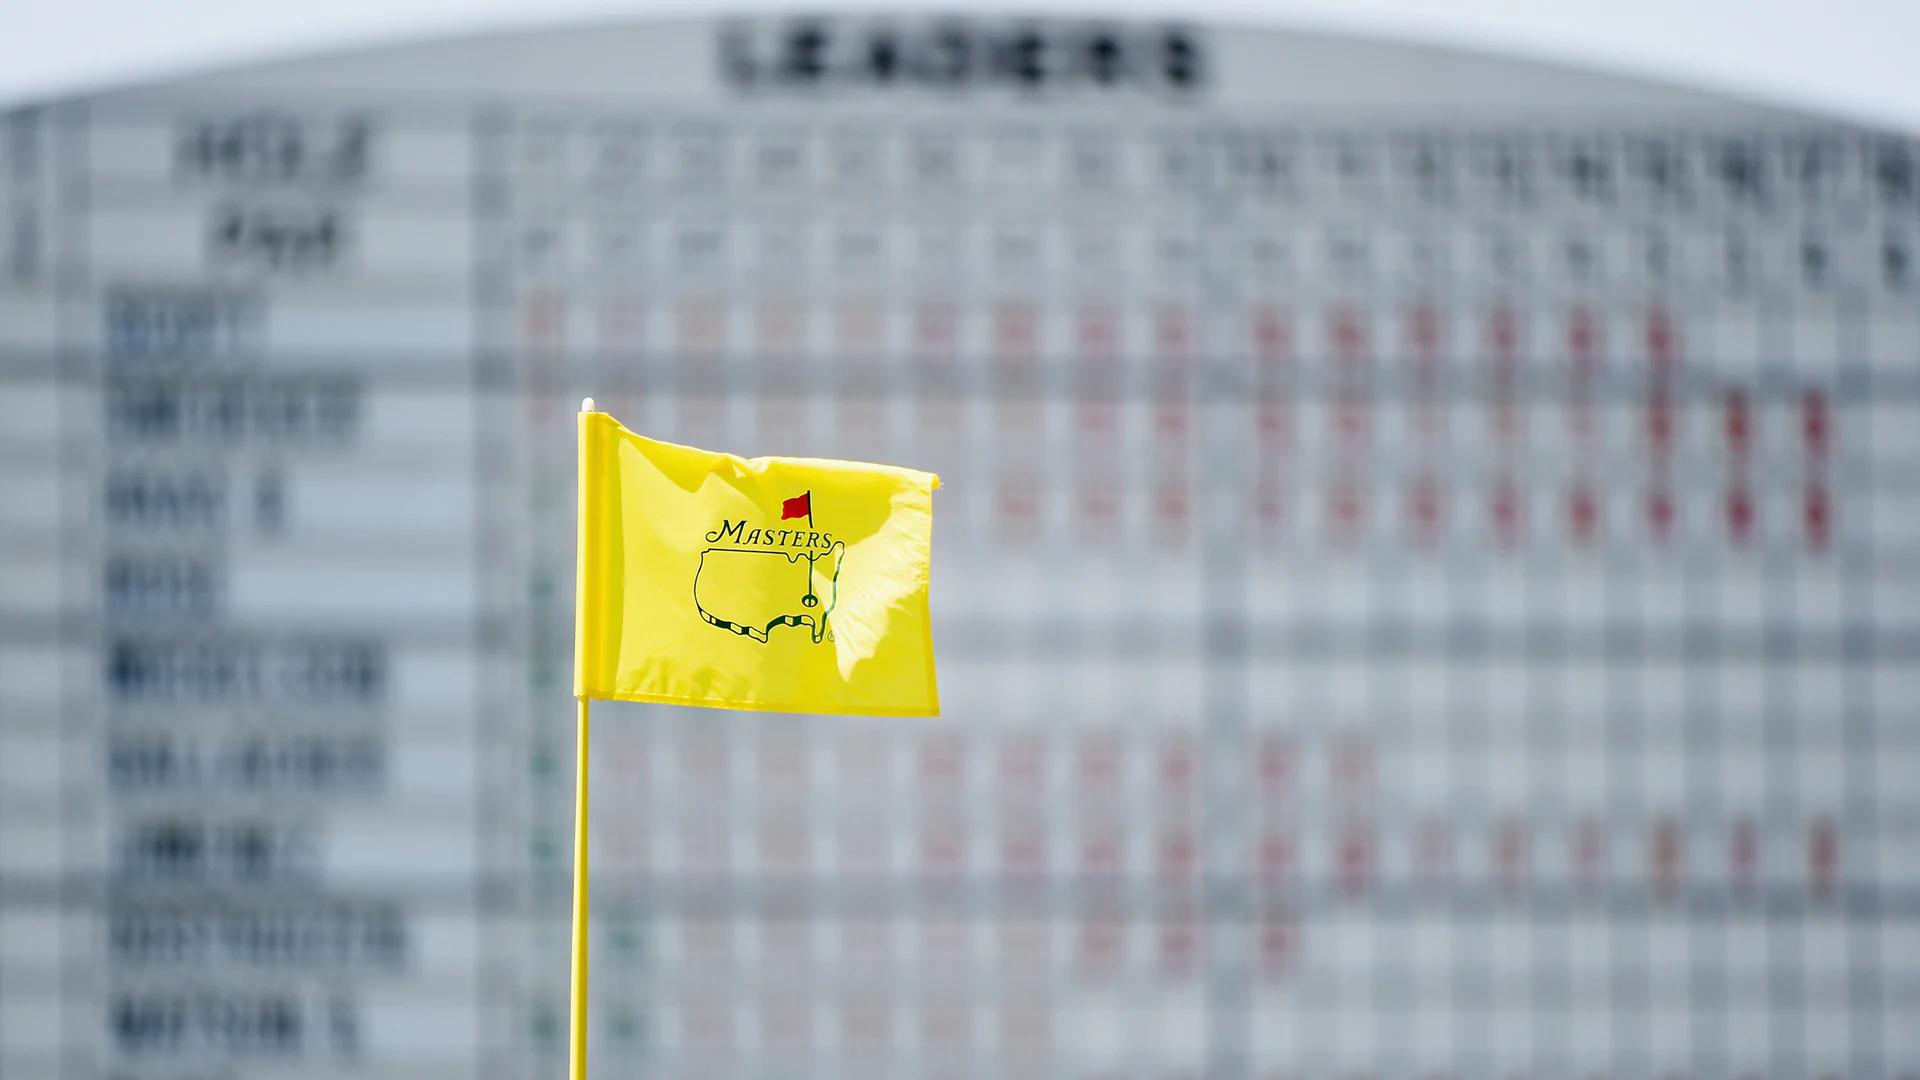 How to watch the 2020 Masters on TV and online